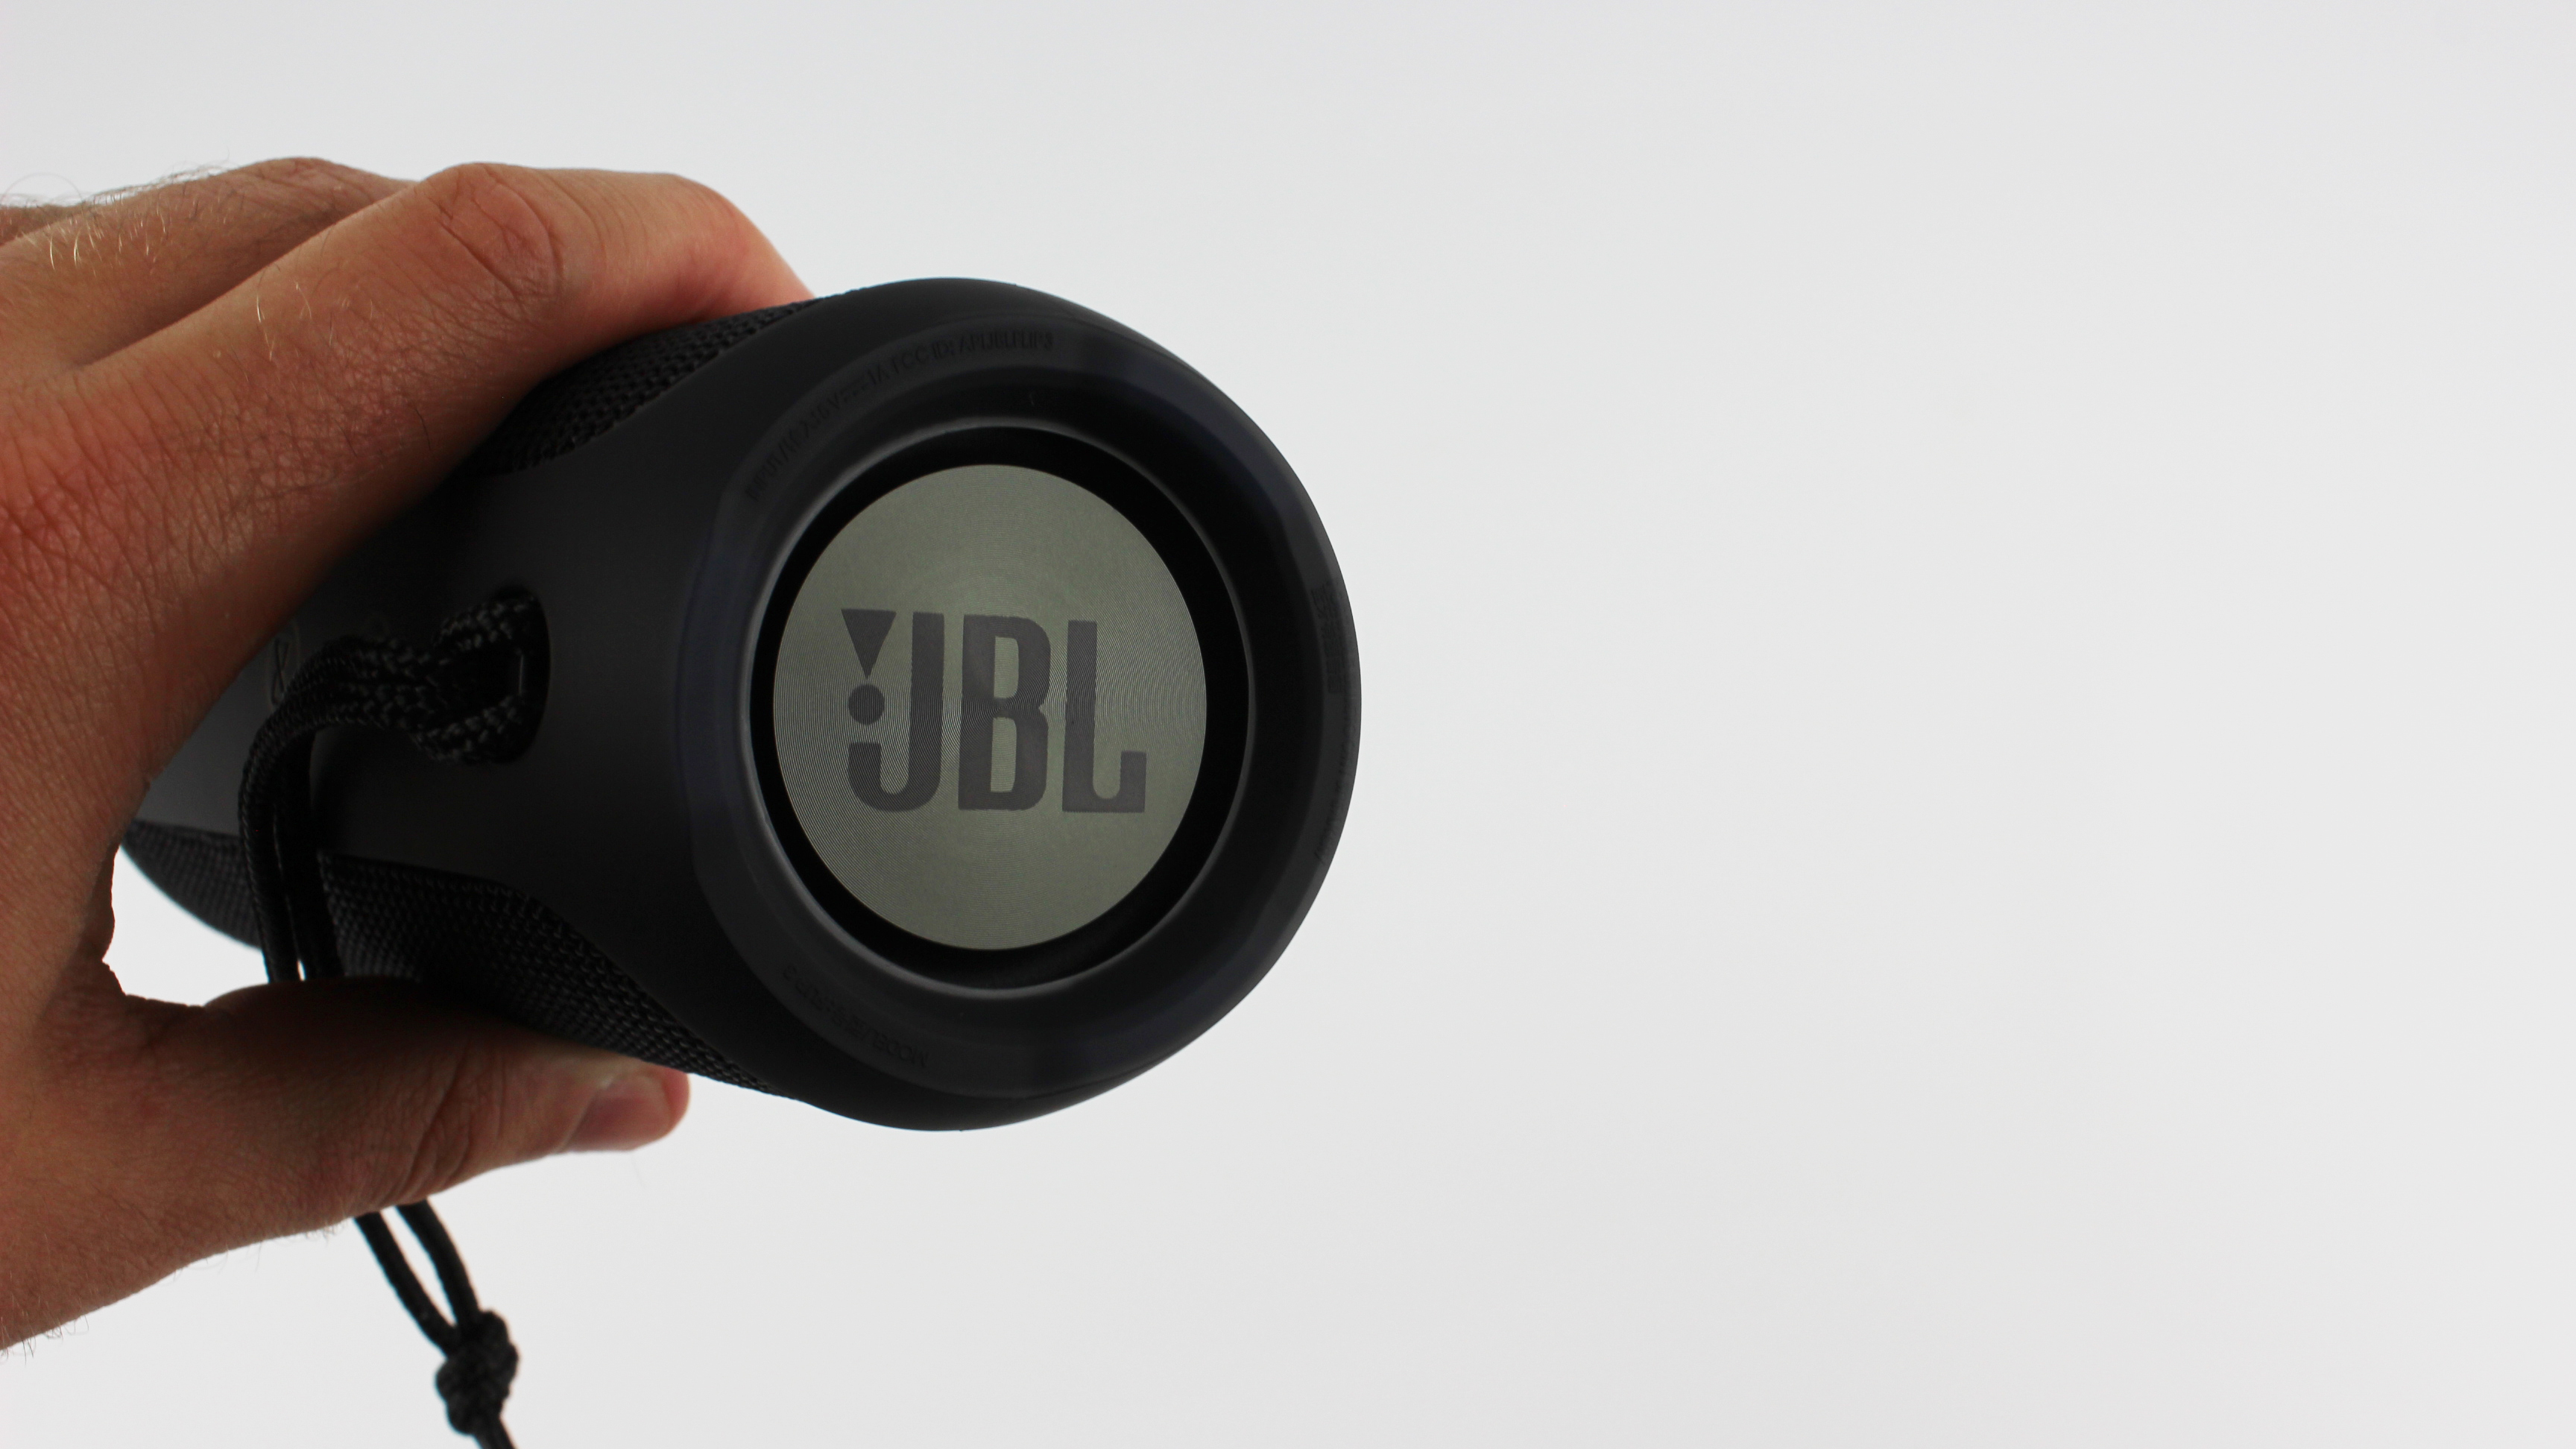 Pictured is Adam holding the JBL Flip 3 from the side.